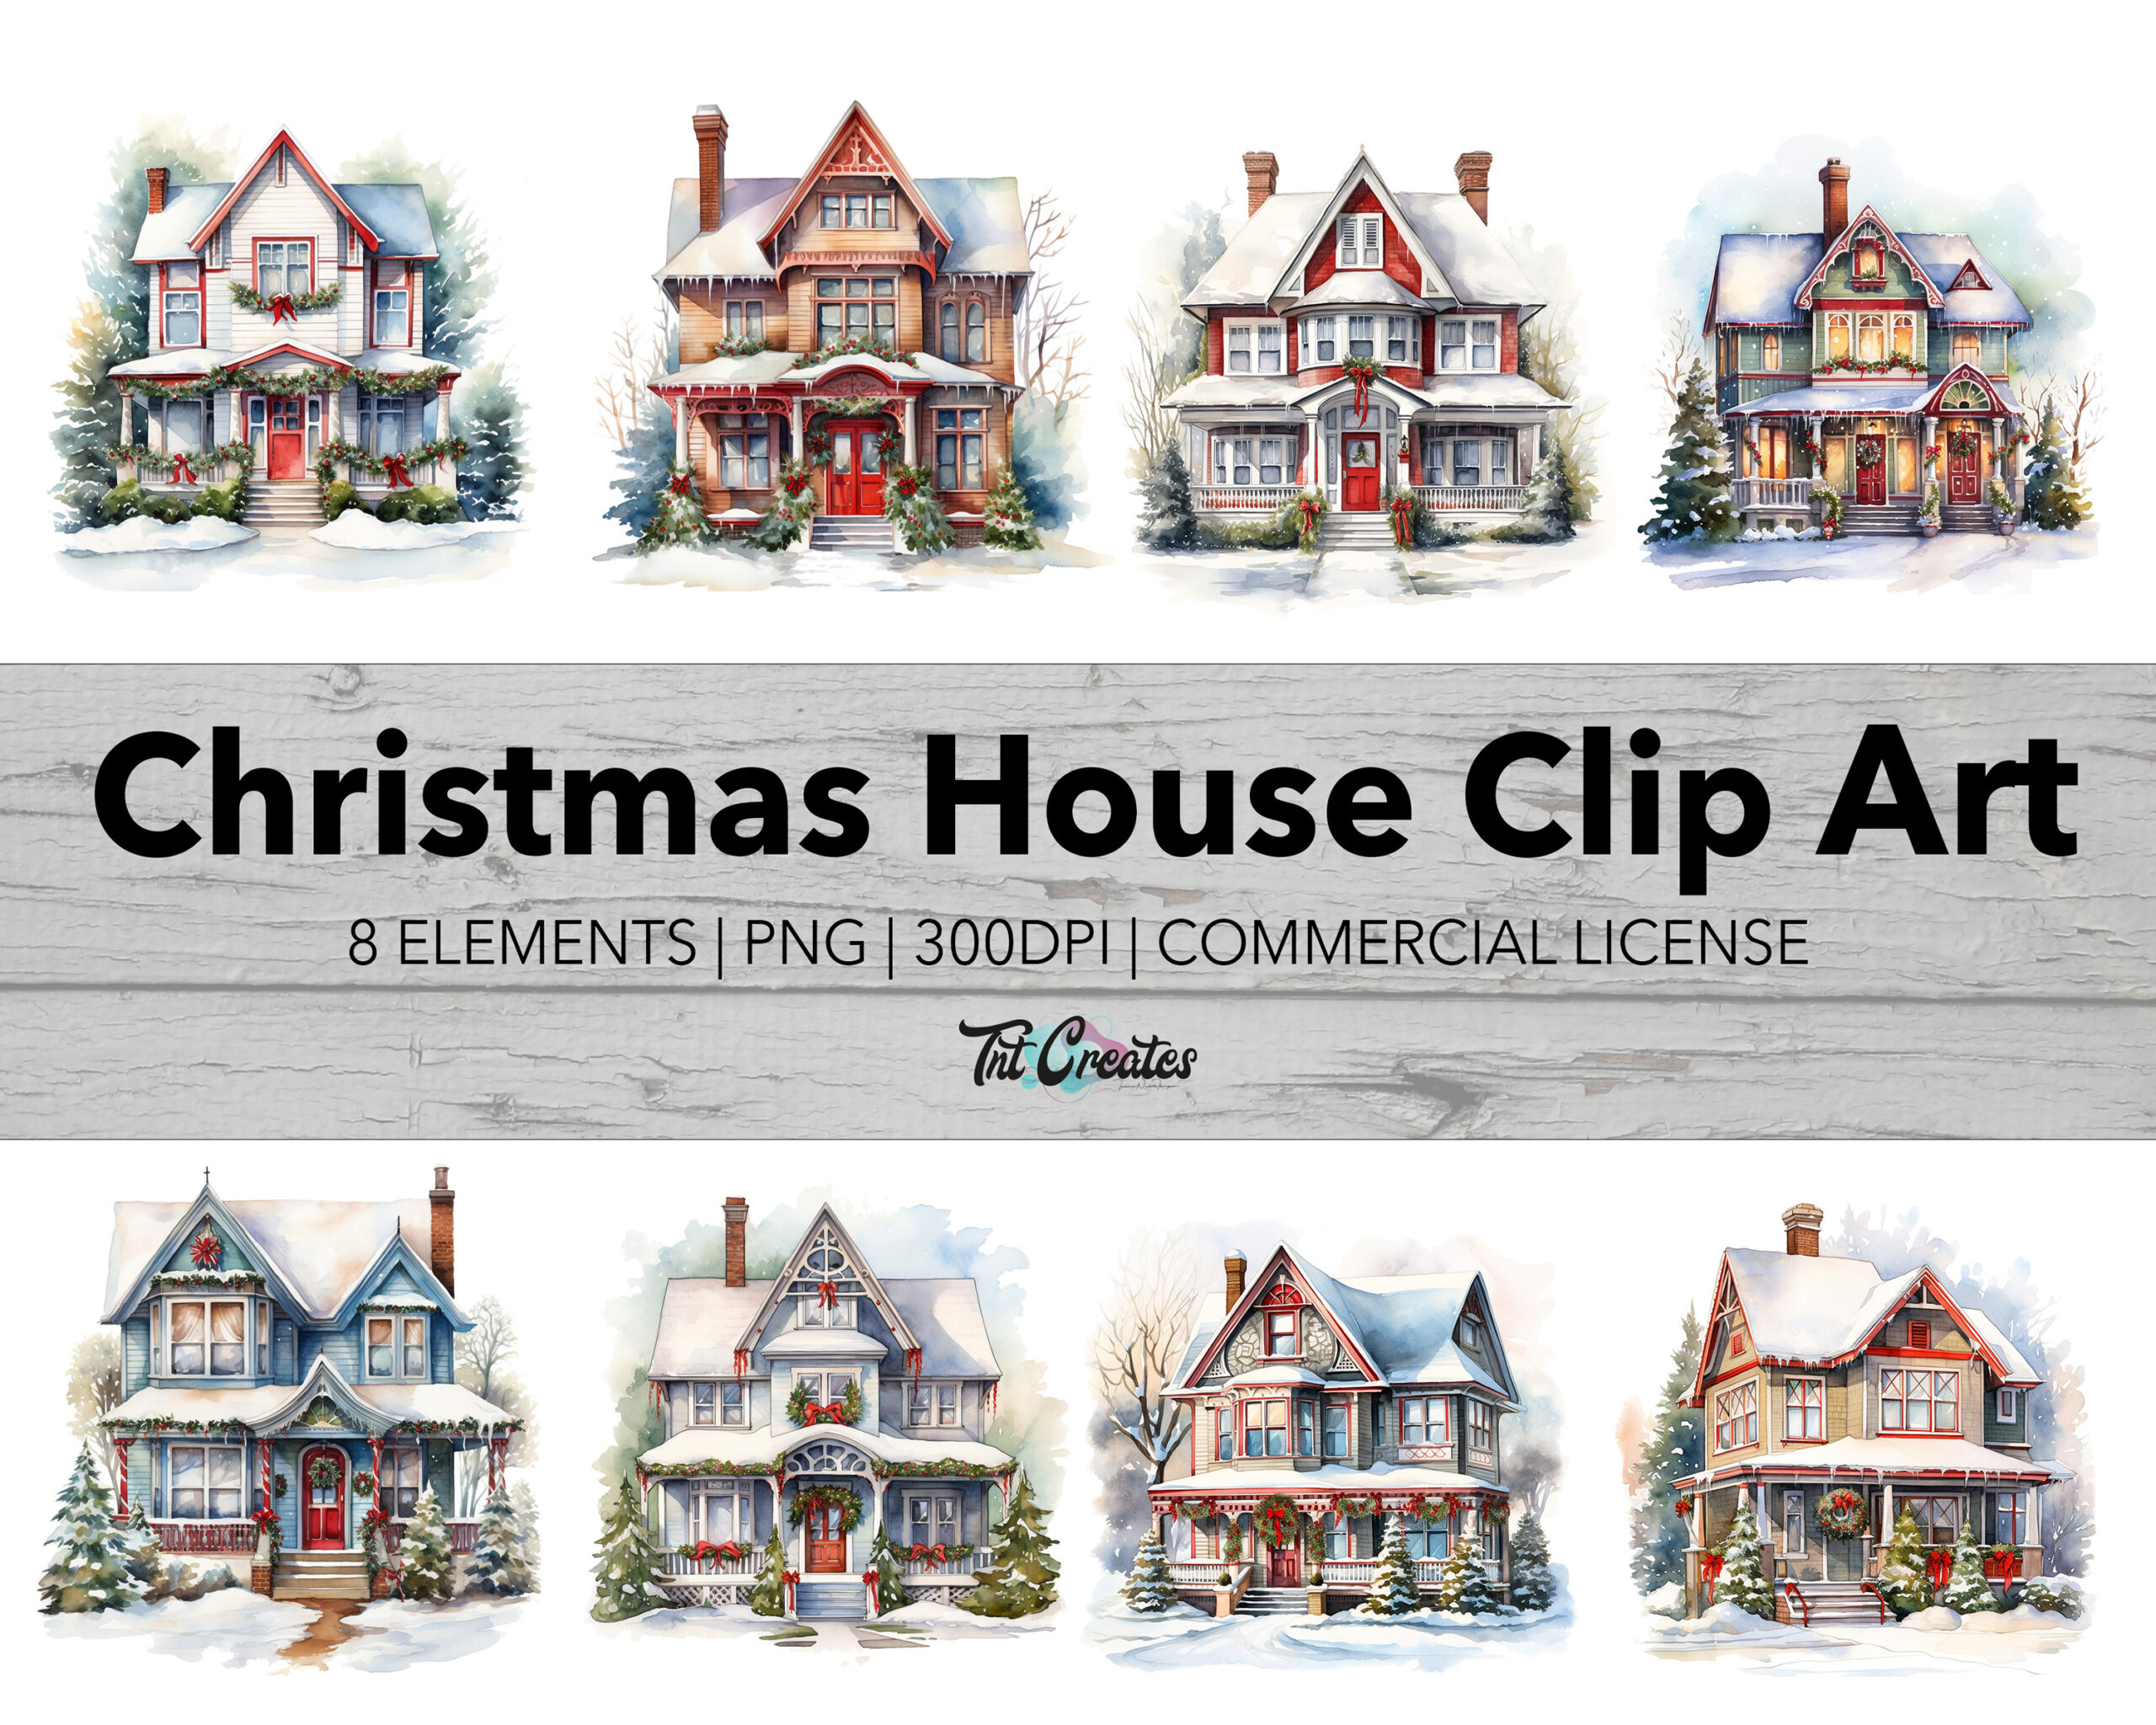 Watercolor Christmas House Holiday Clip Art, Transparent Background Digital Download PNG Clipart Bundle, Commercial Use